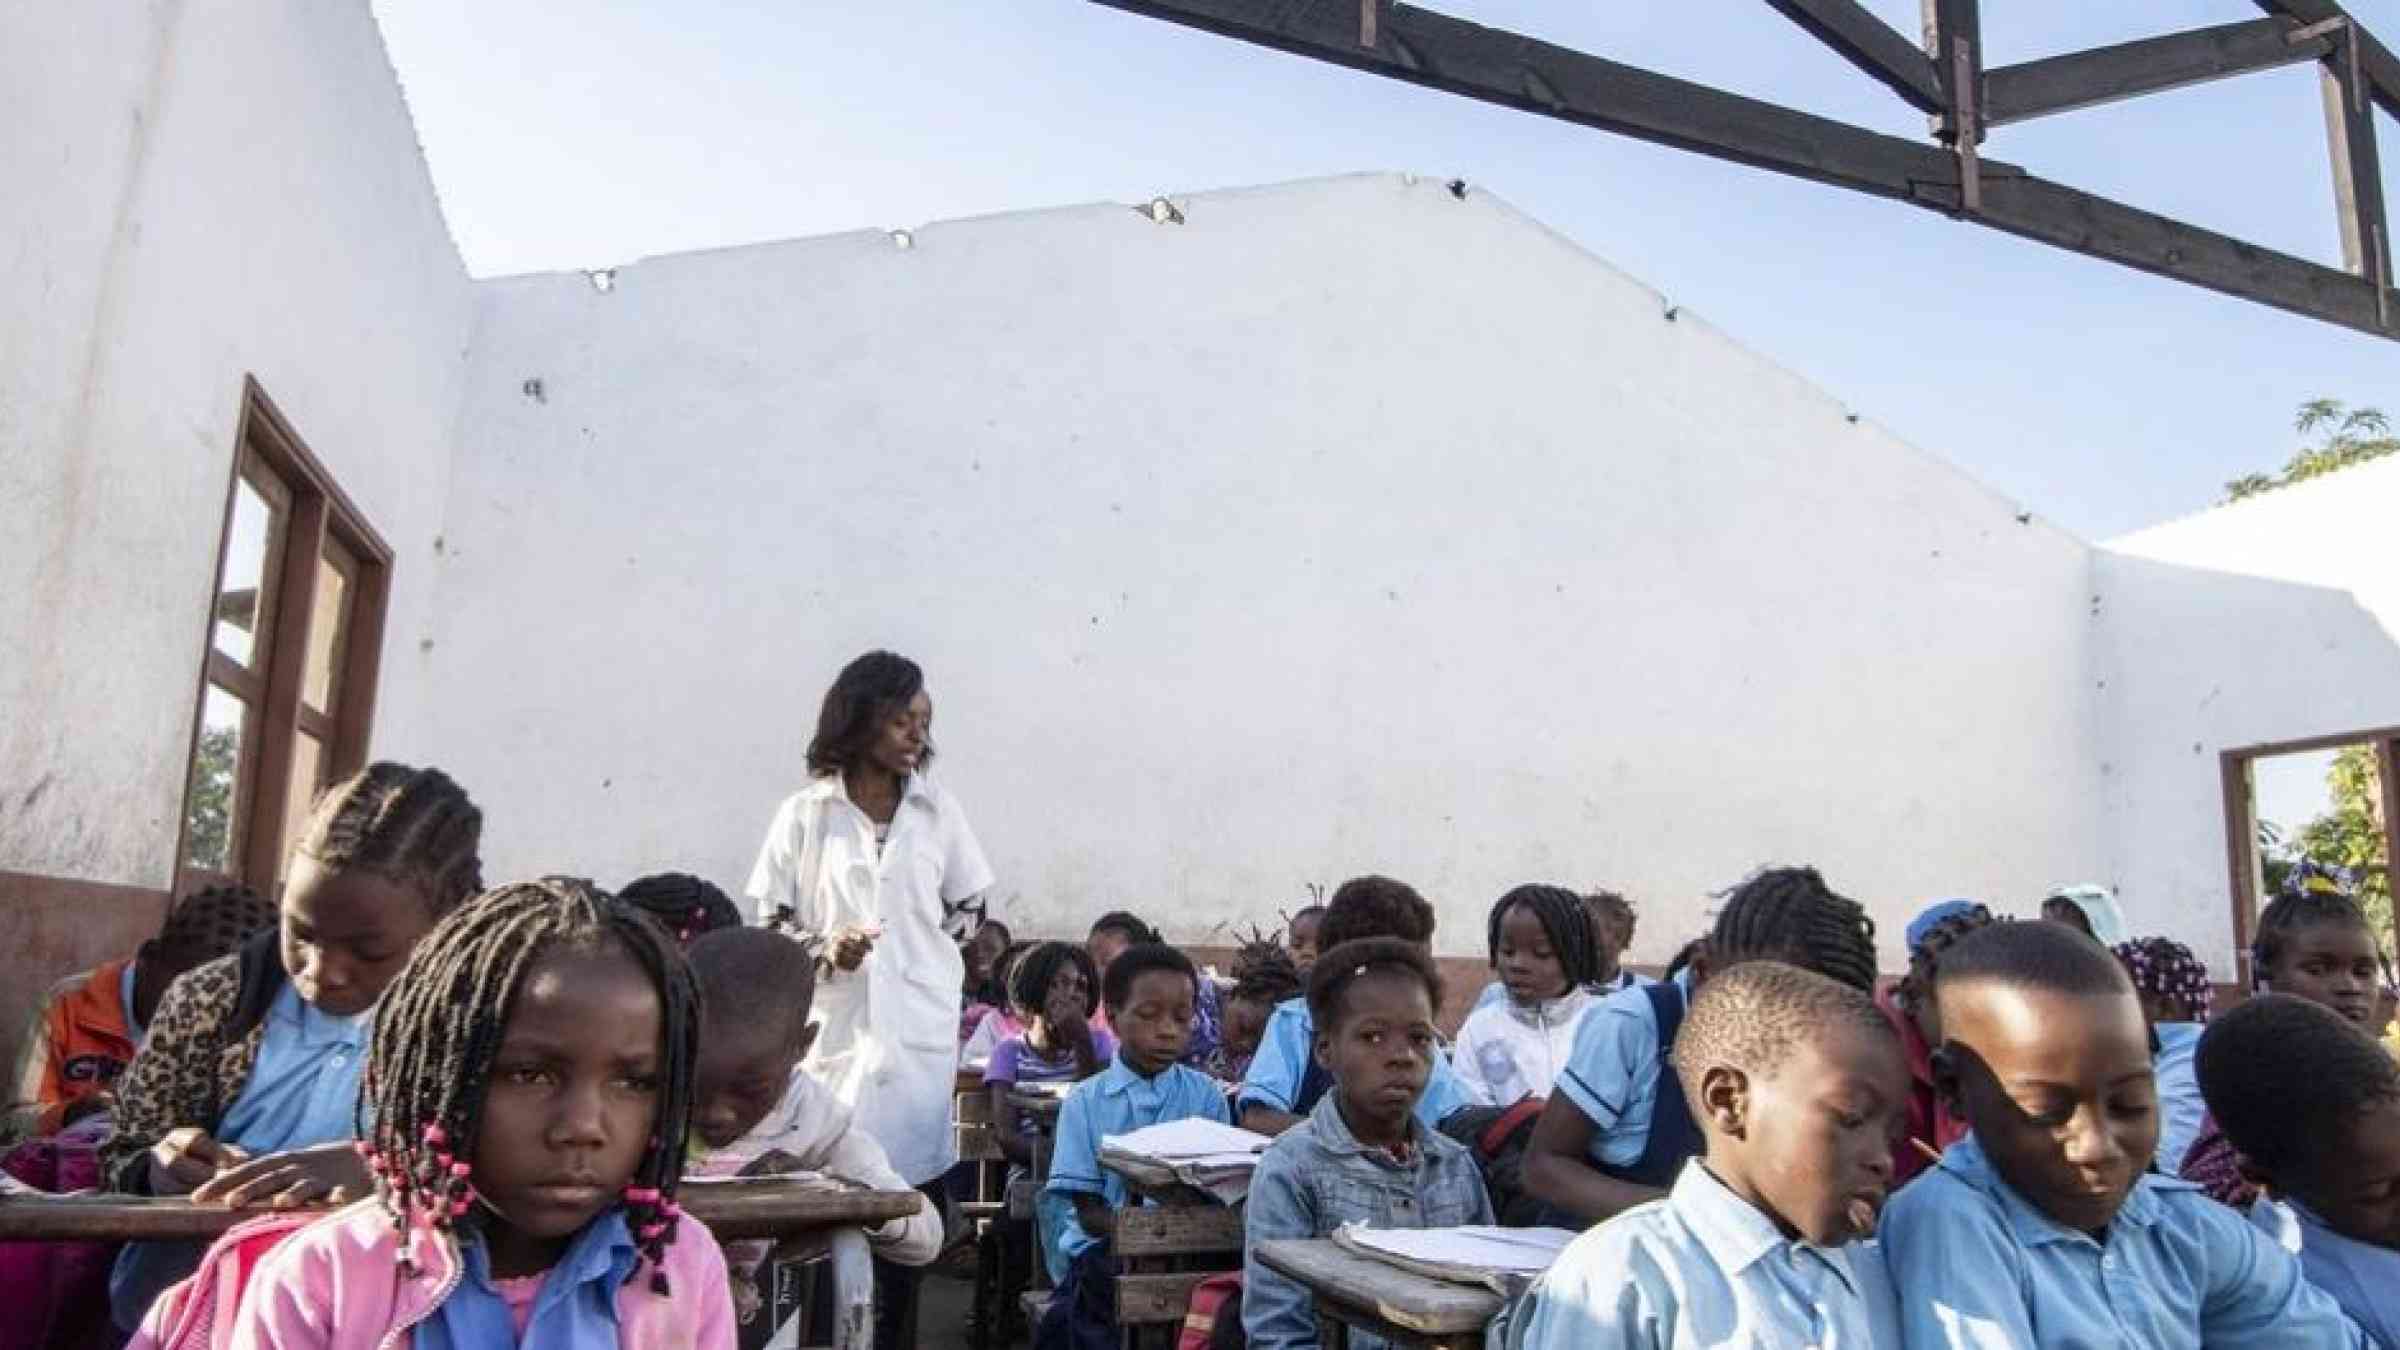 Classes continue in Beira after cyclone Idai in difficult conditions